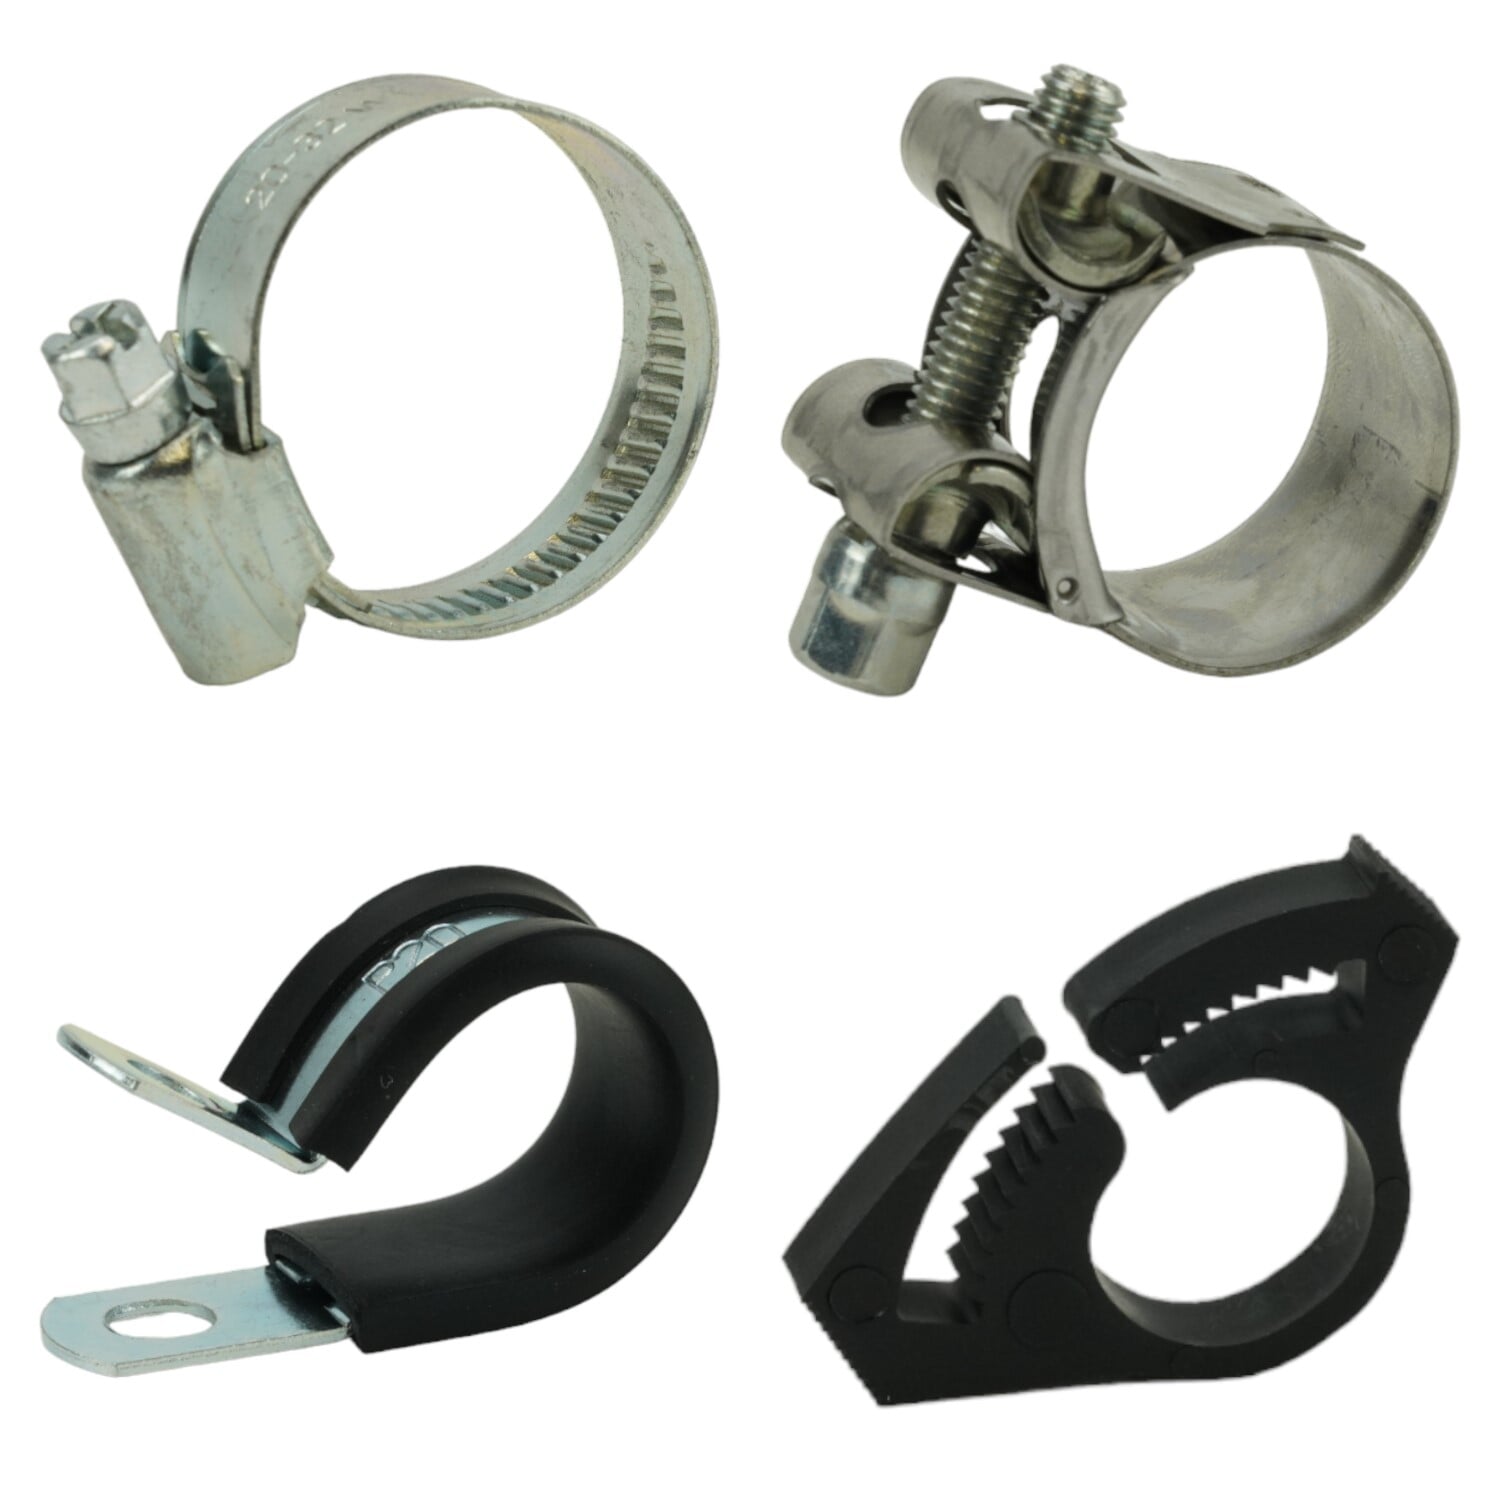 Hose Clamps Part I: Design and Selection